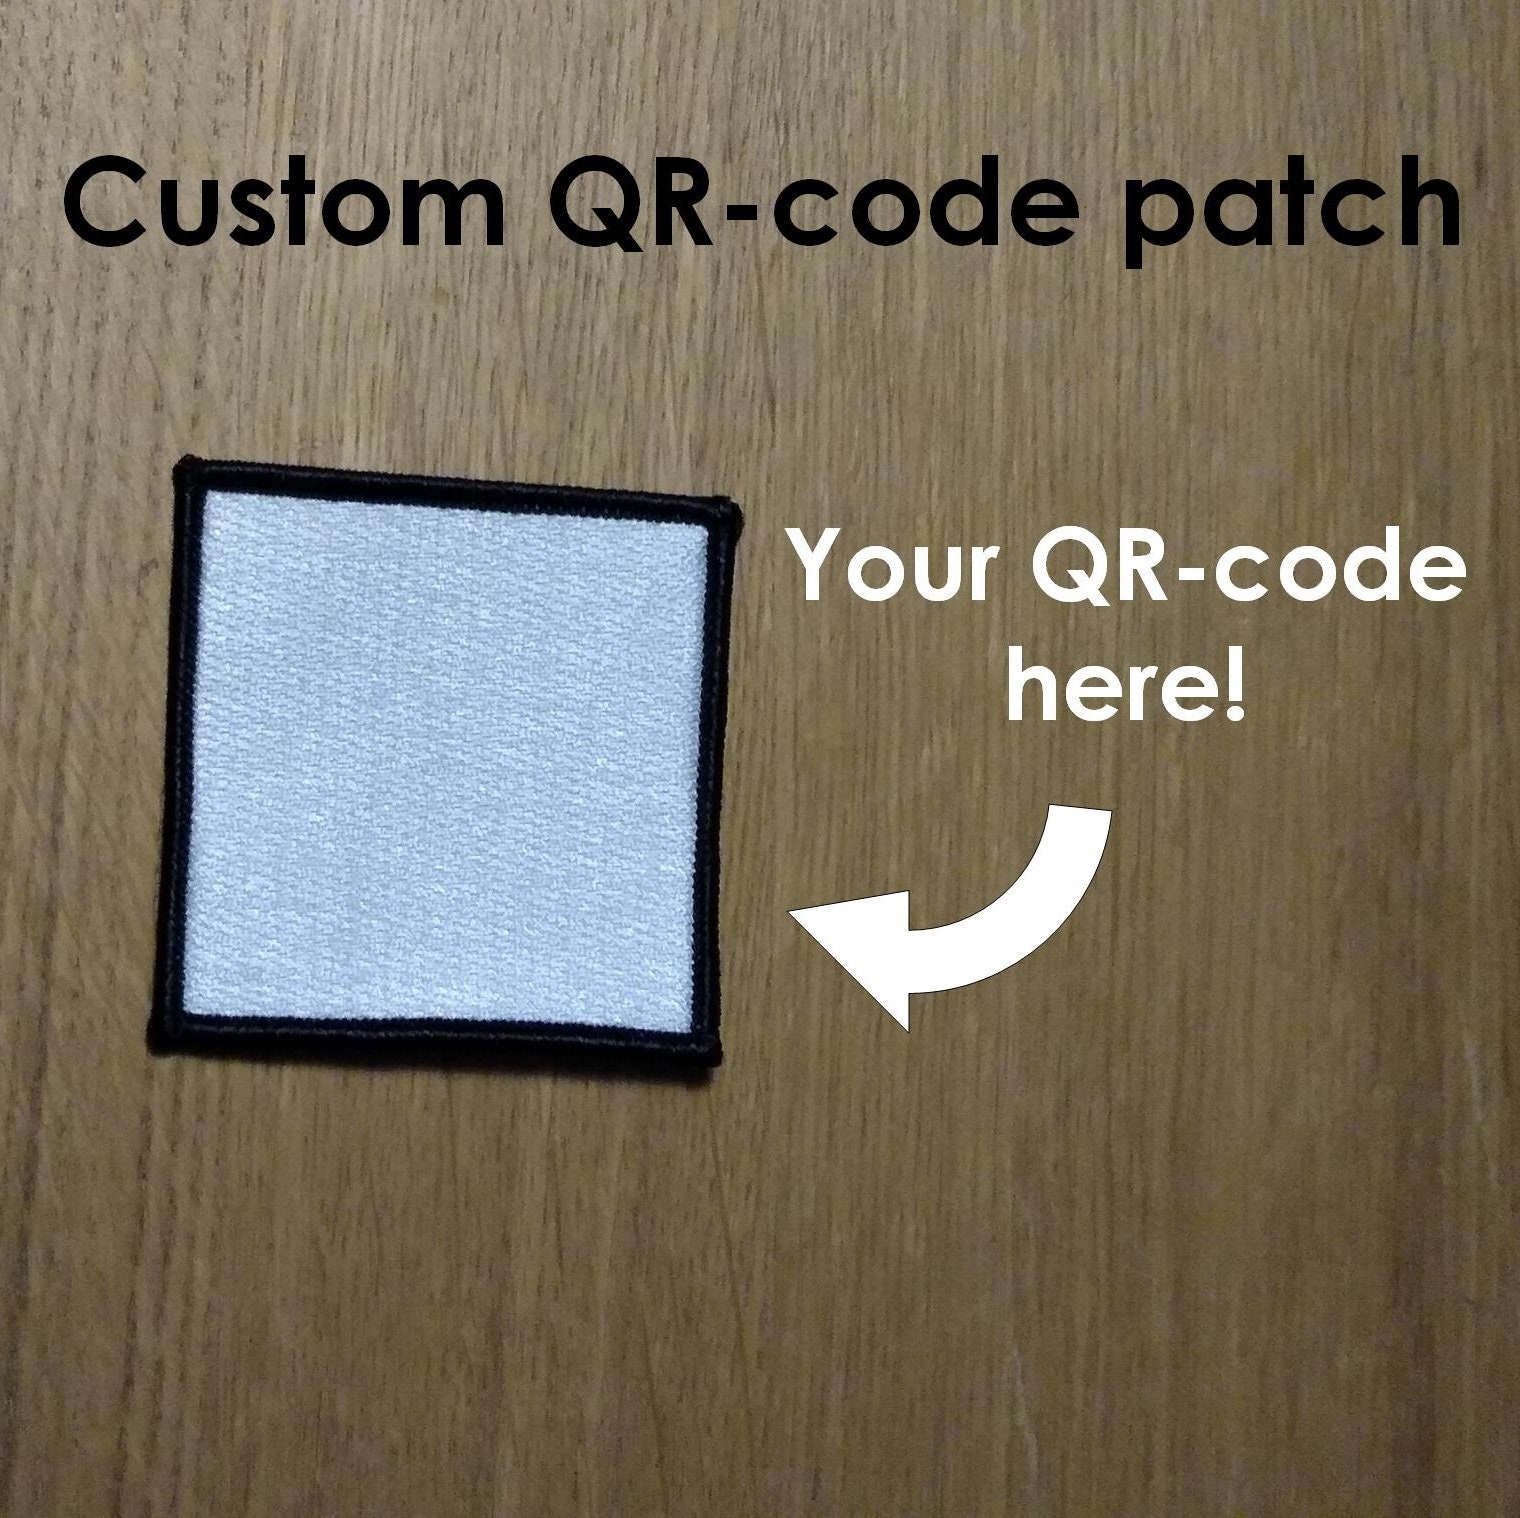 rickroll qr code patch  Rick Roll QR Code Funny Morale Patch.2x3 Hook and  Loop Patch. Made in The USA